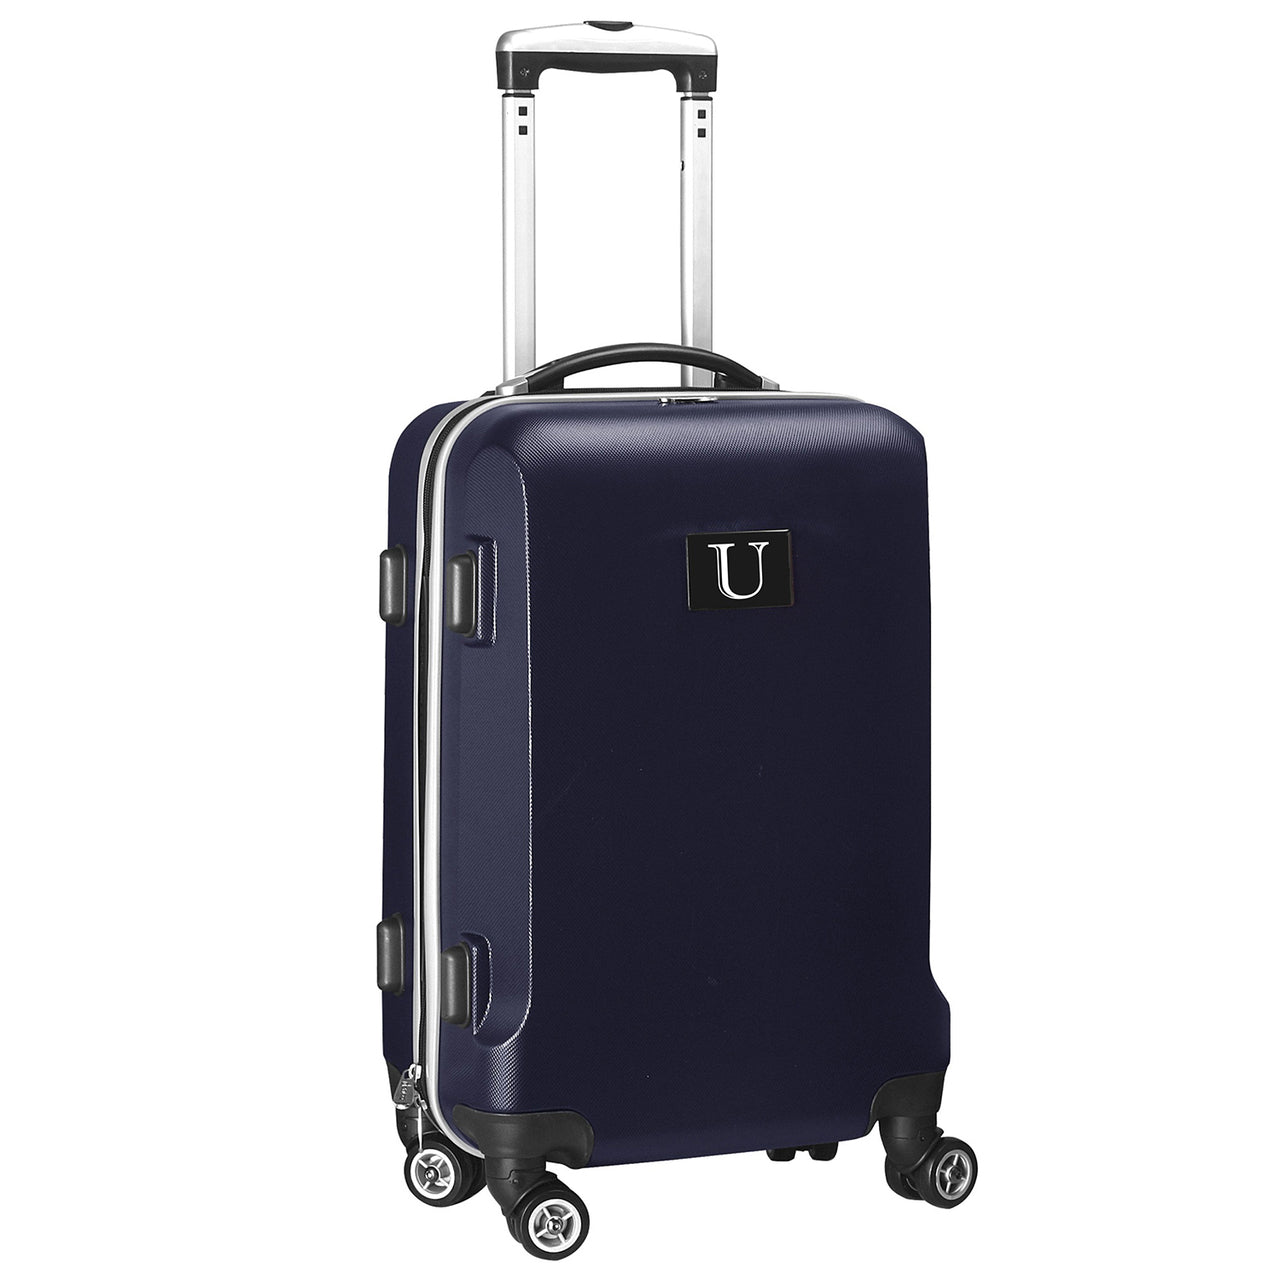 Personalized Initial Name letter "U" 20 inches Carry on Hardcase Spinner Luggage by Mojo  in NAVY